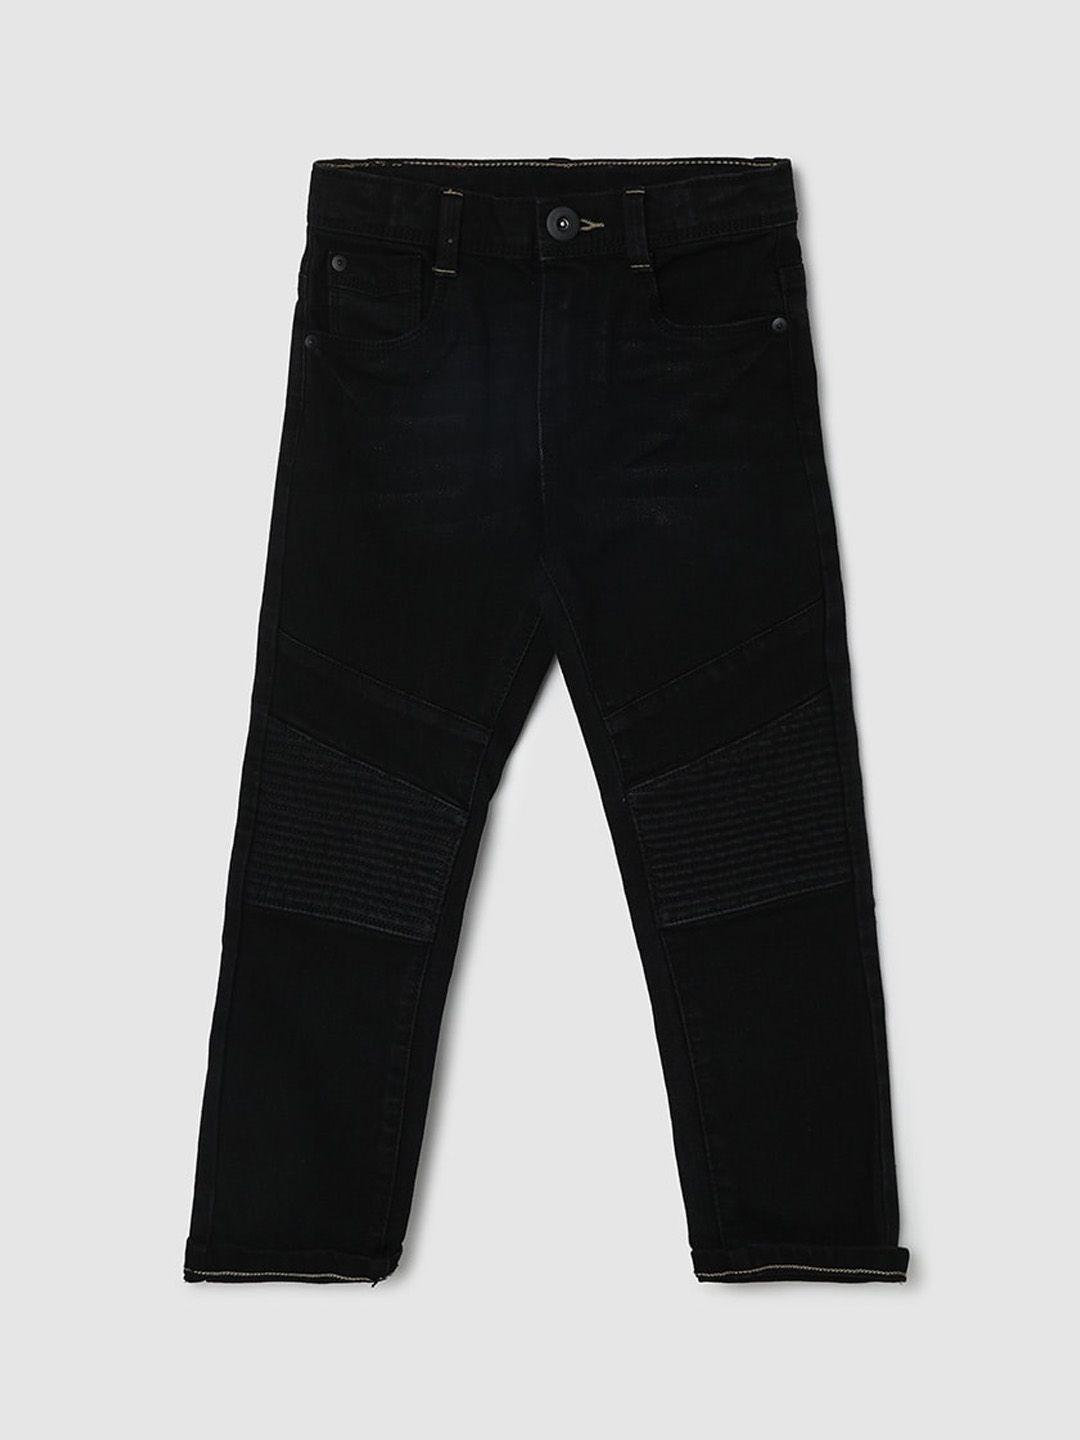 max-boys-mid-rise-regular-fit-jeans